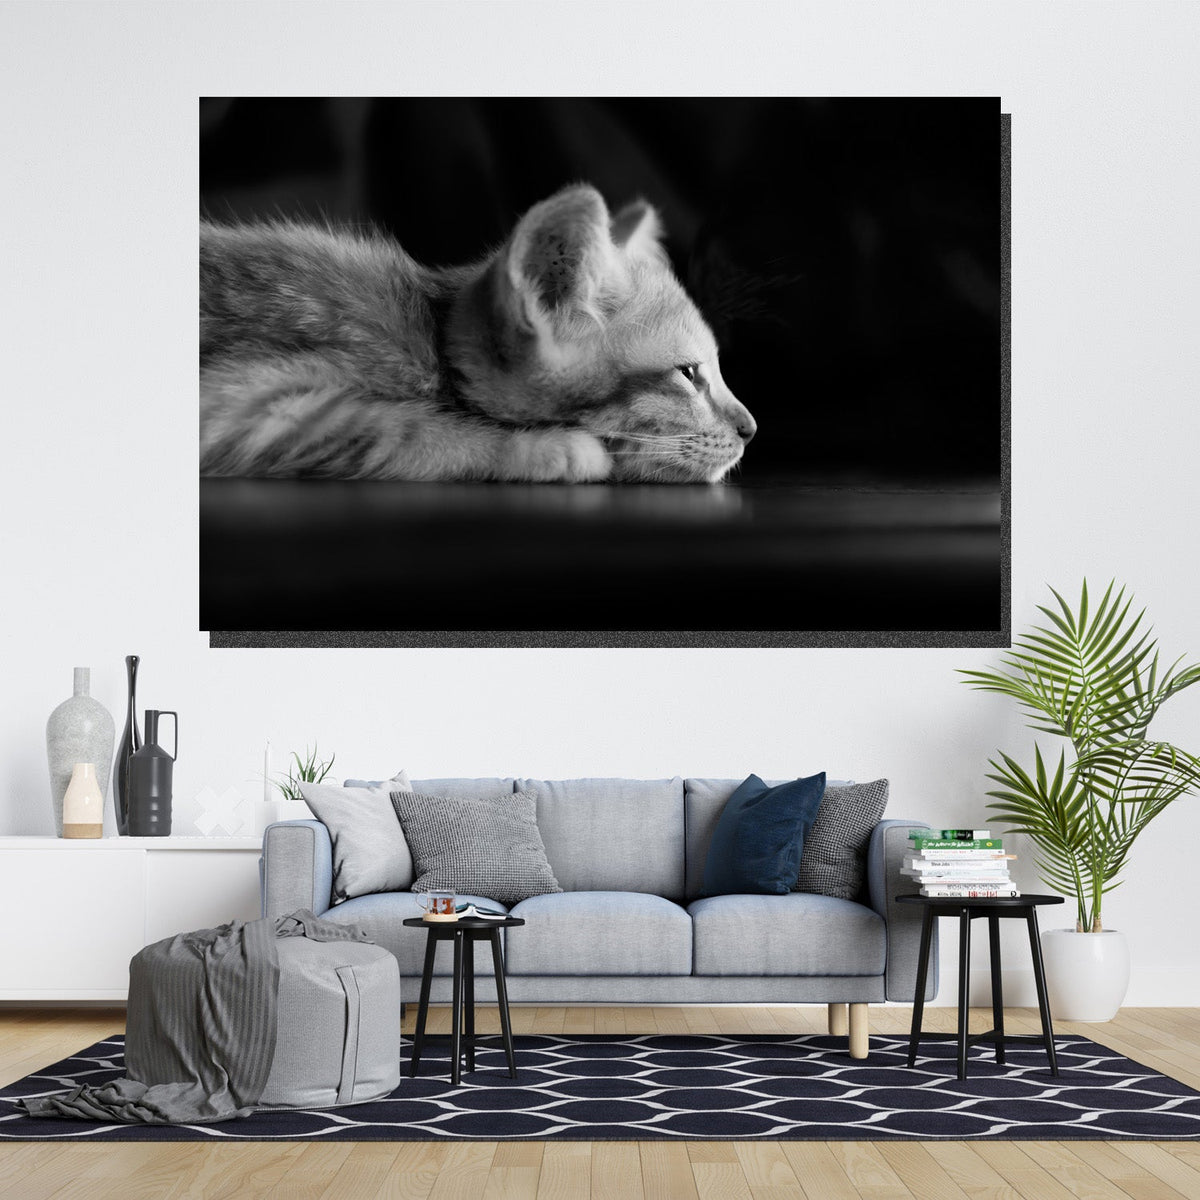 https://cdn.shopify.com/s/files/1/0387/9986/8044/products/LazyKittenCanvasArtprintStretched-1.jpg